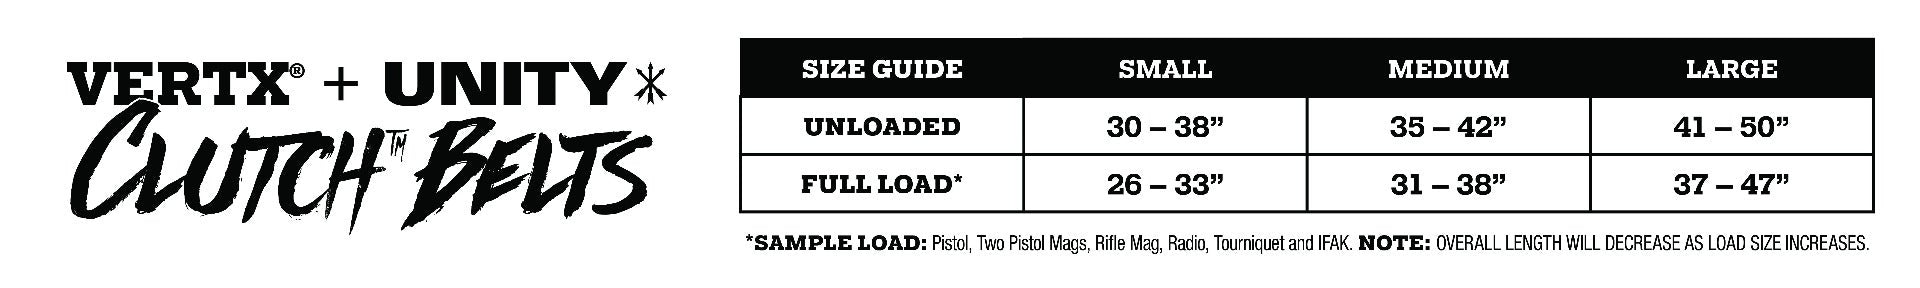 Sizing guide for Vertx® CLUTCH™ Belt.